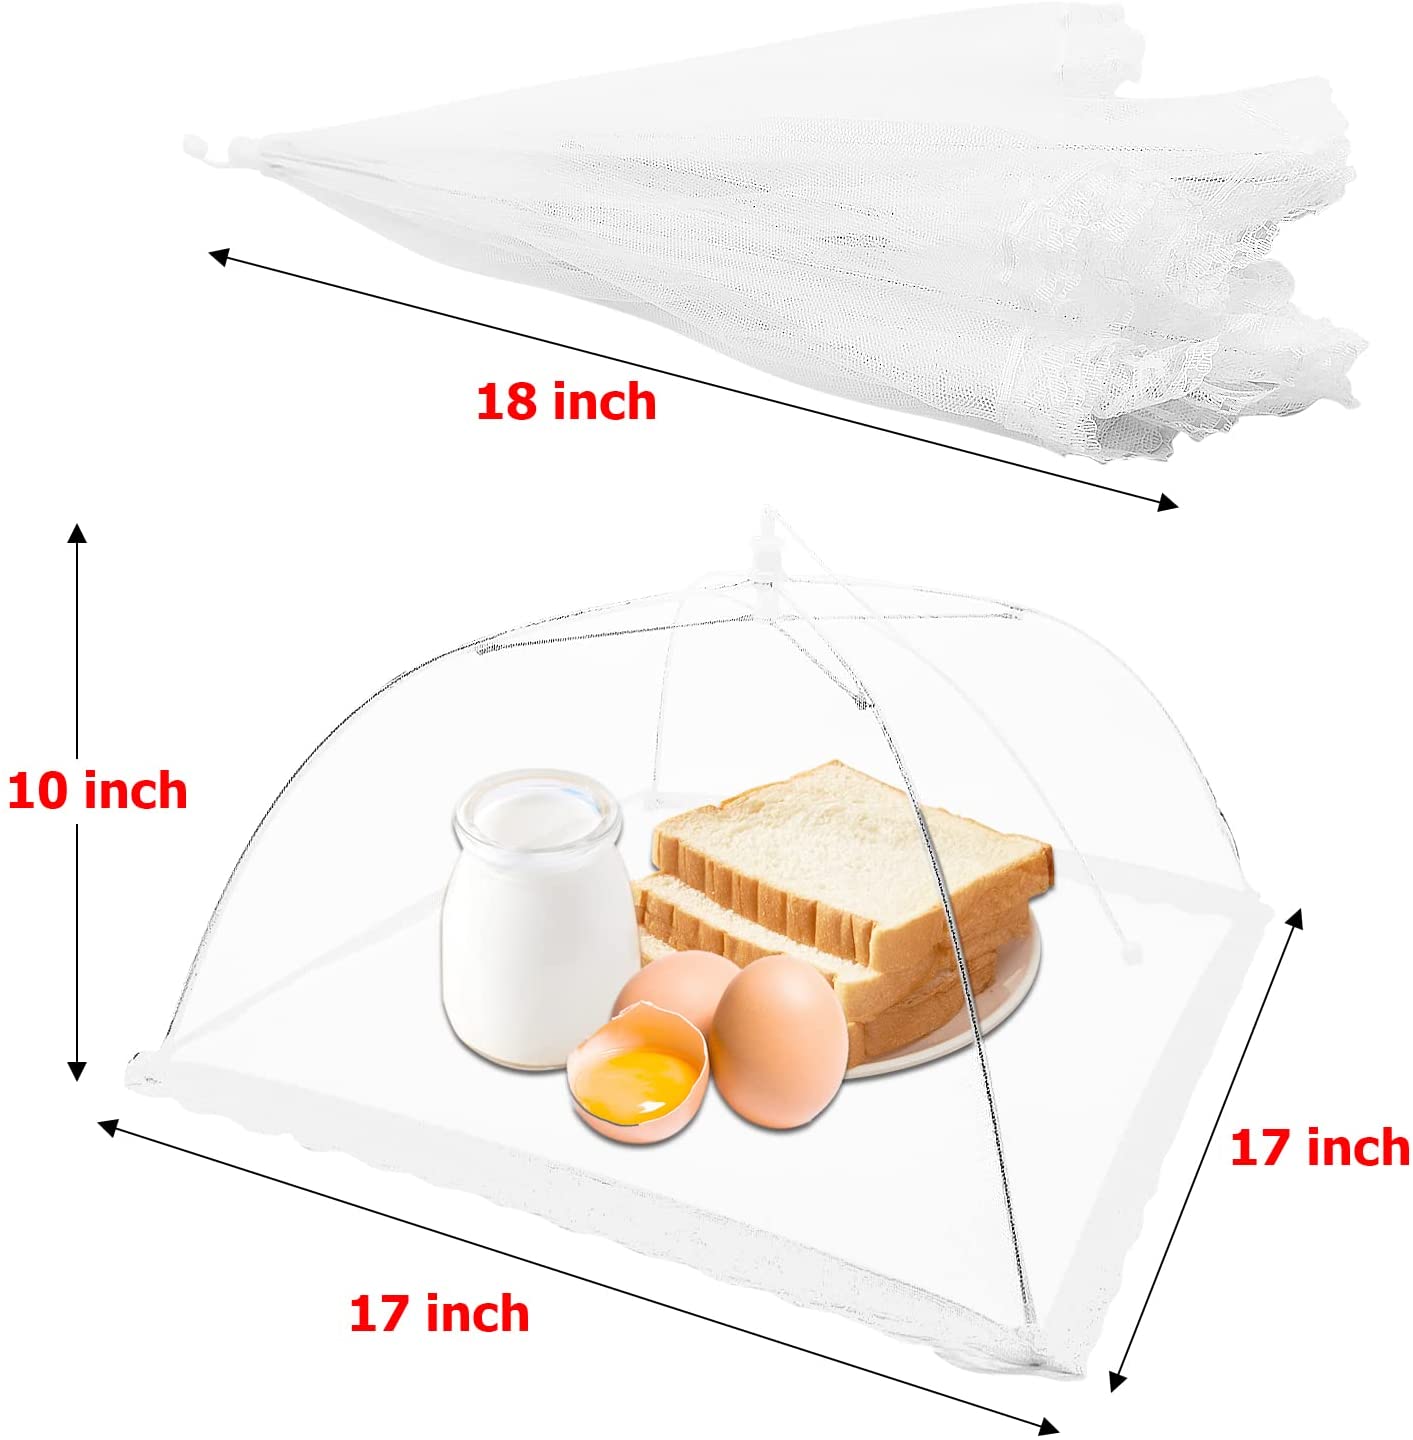 6 Pack - 17 x 17 Inch - Food Covers Tents,Pop-Up Fine Net Screen Umbrella,Reusable and Collapsible Mesh Cover for Outdoors, Parties, Picnics, BBQ